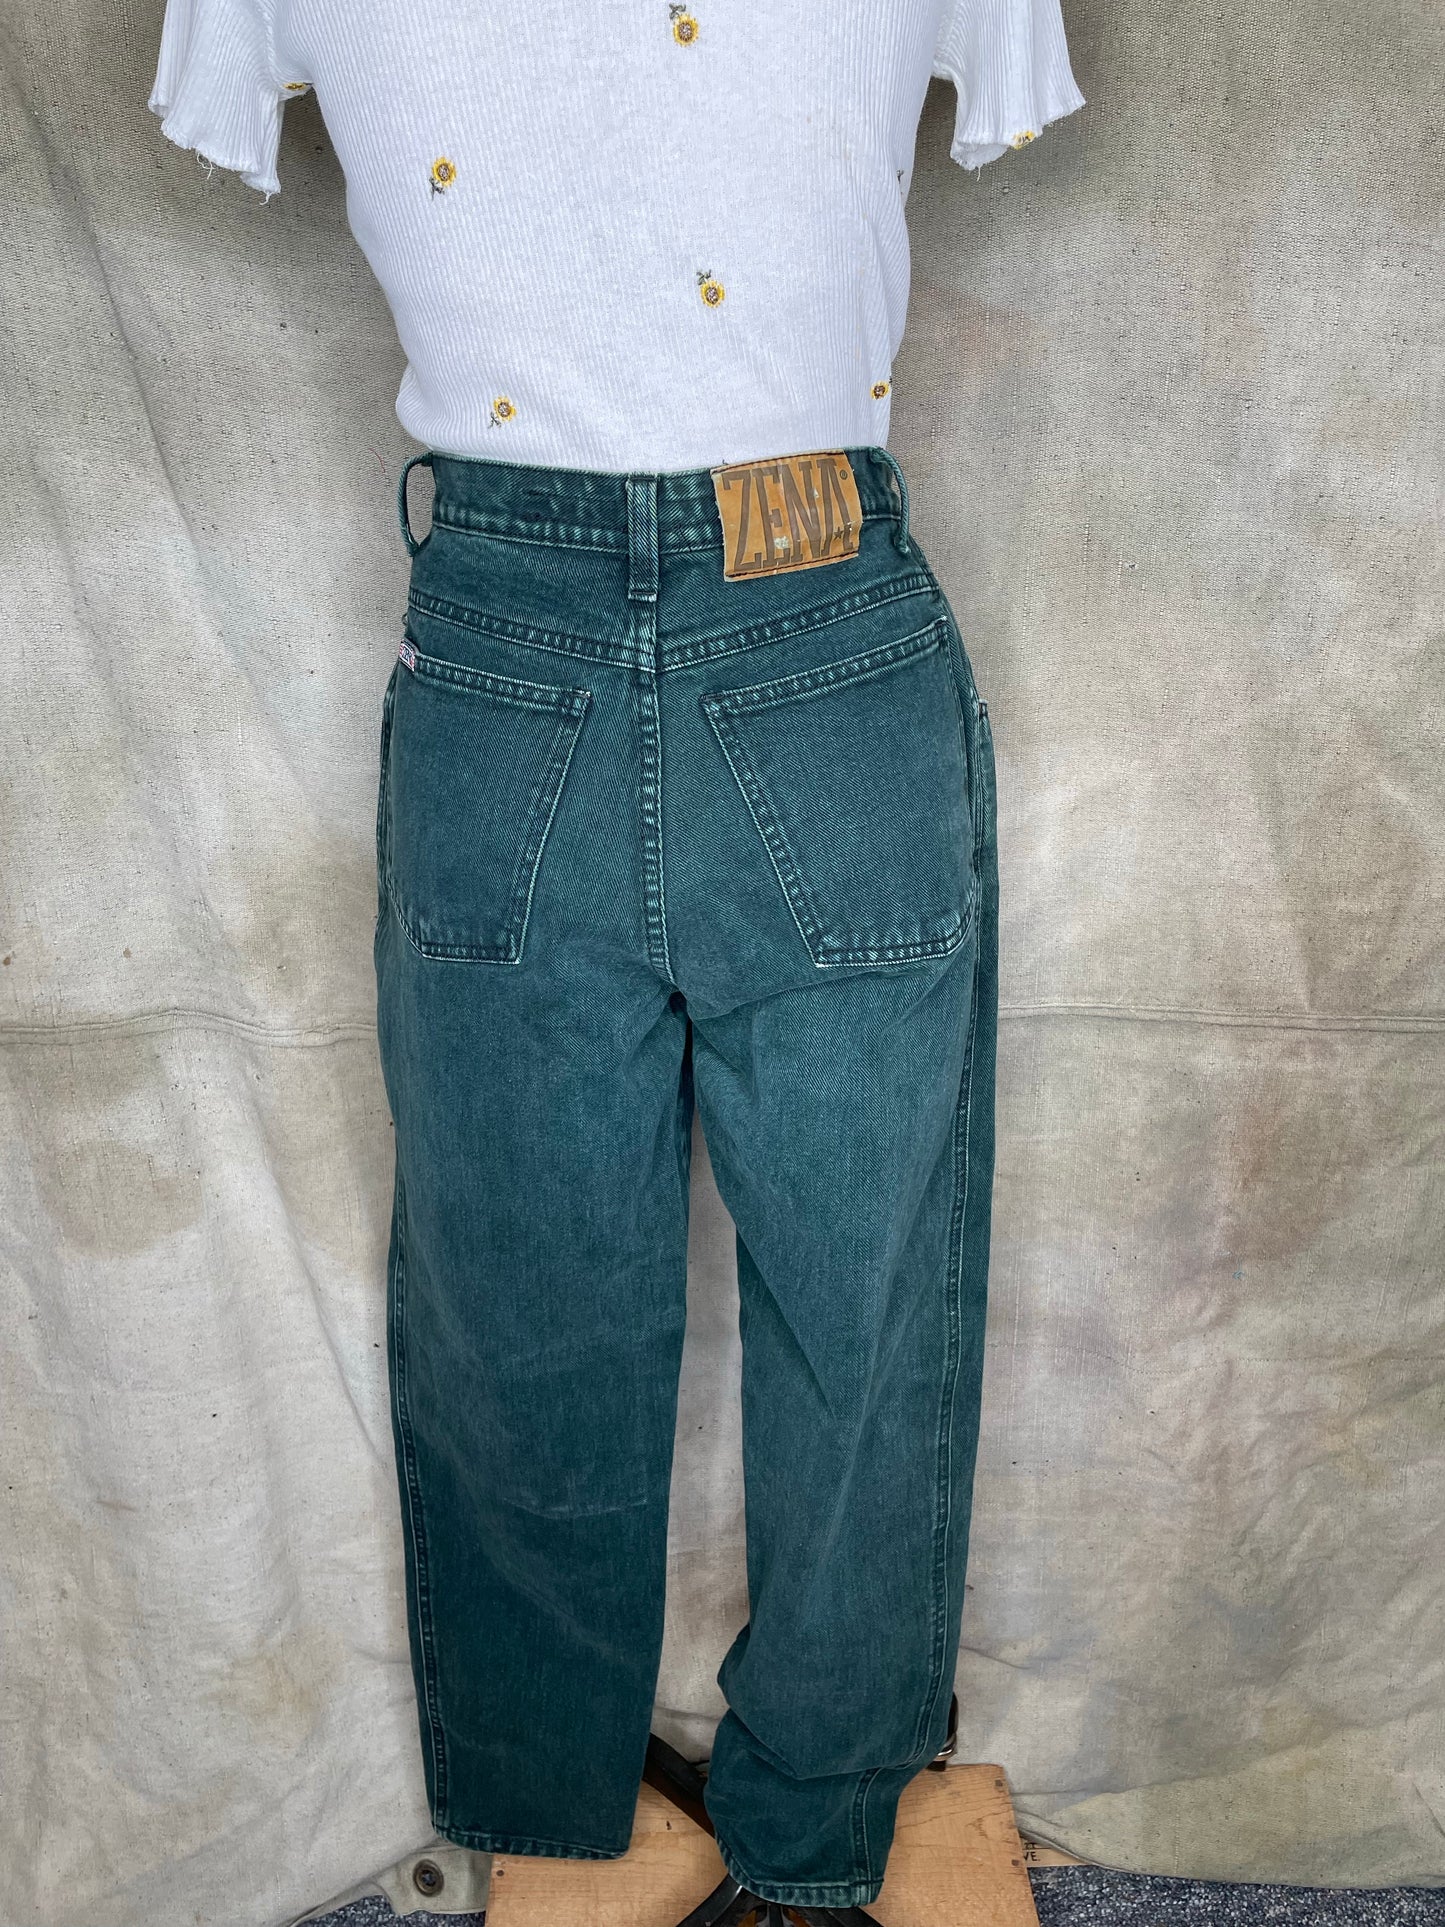 Vintage Zena 90s Green High Waisted Mom Jeans